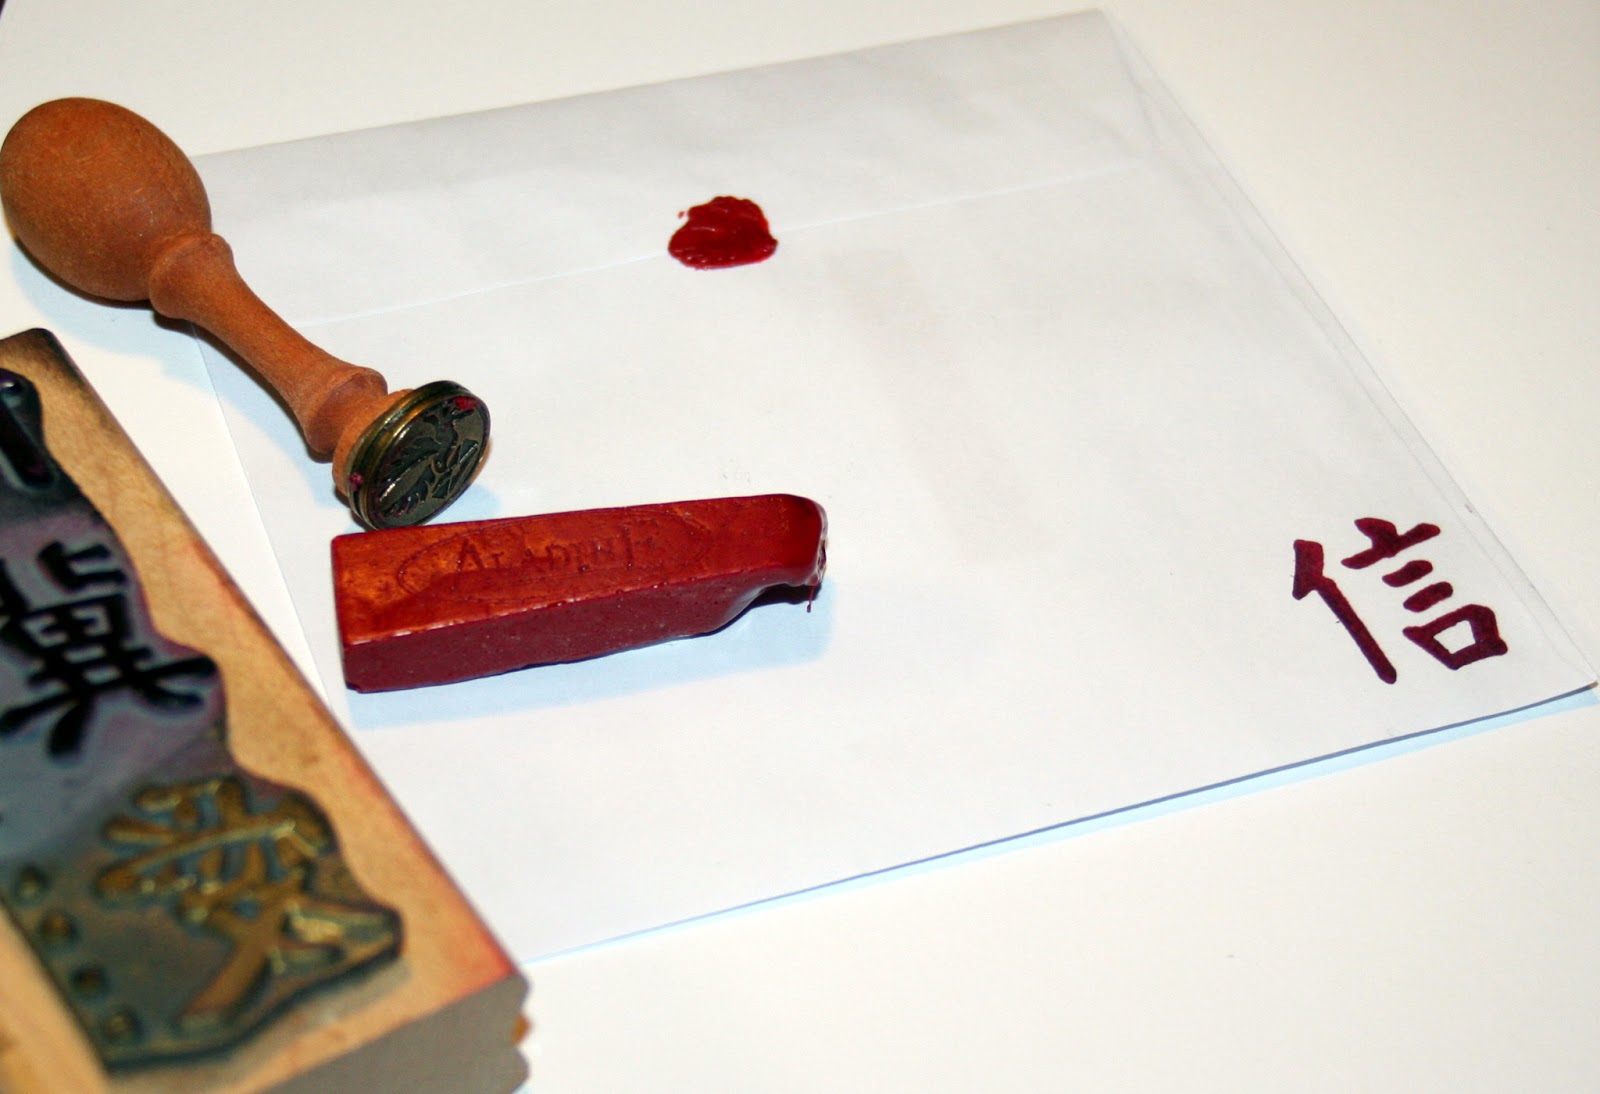 ... wax seal to finish it off. I love my wax seal and had actually